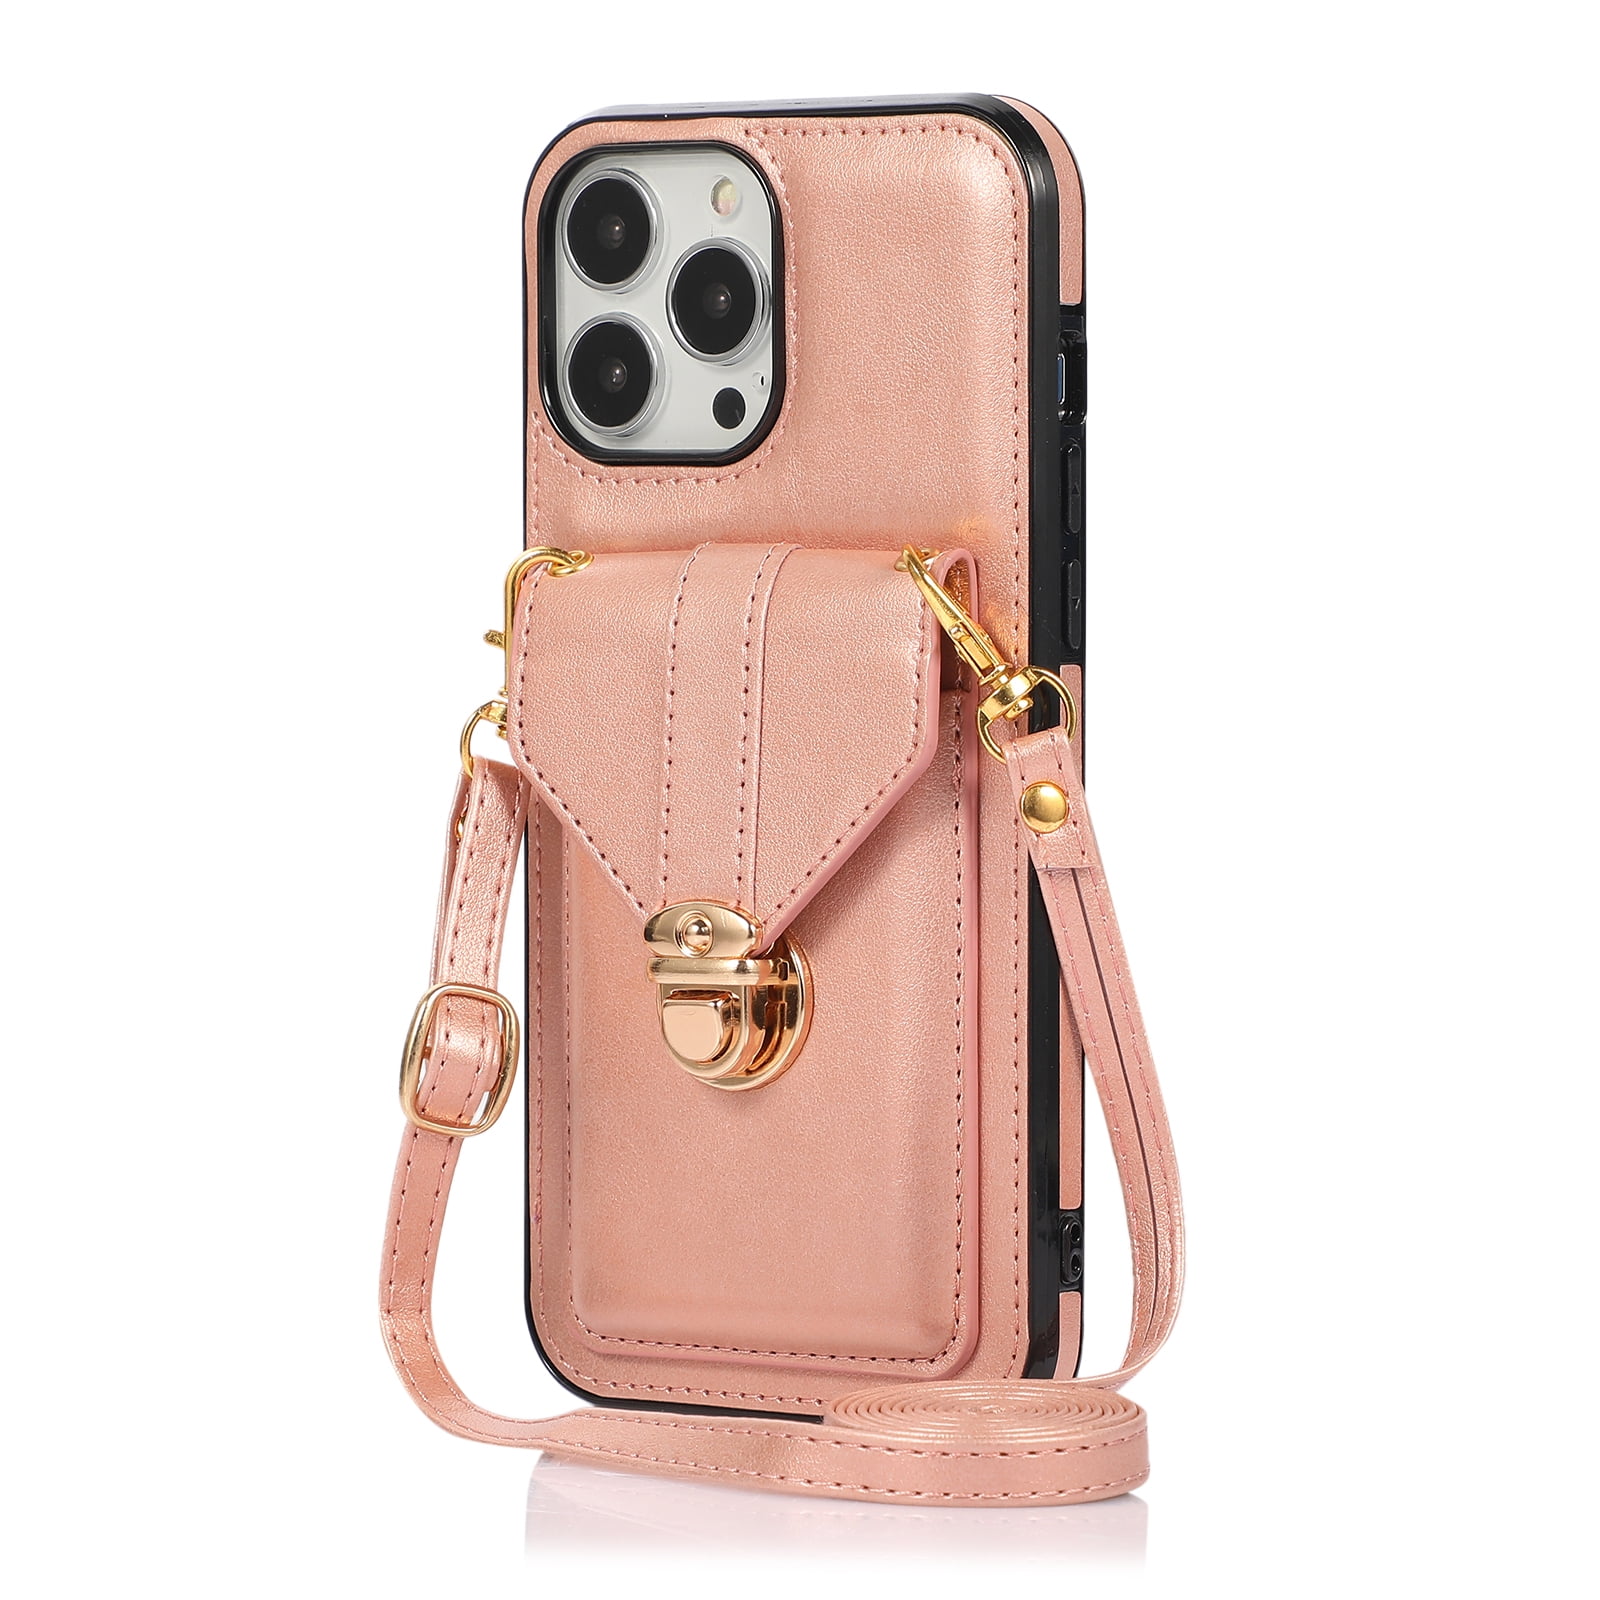 Vaultskin VICTORIA Crossbody Wallet Case for iPhone 13 Pro Chain Strap